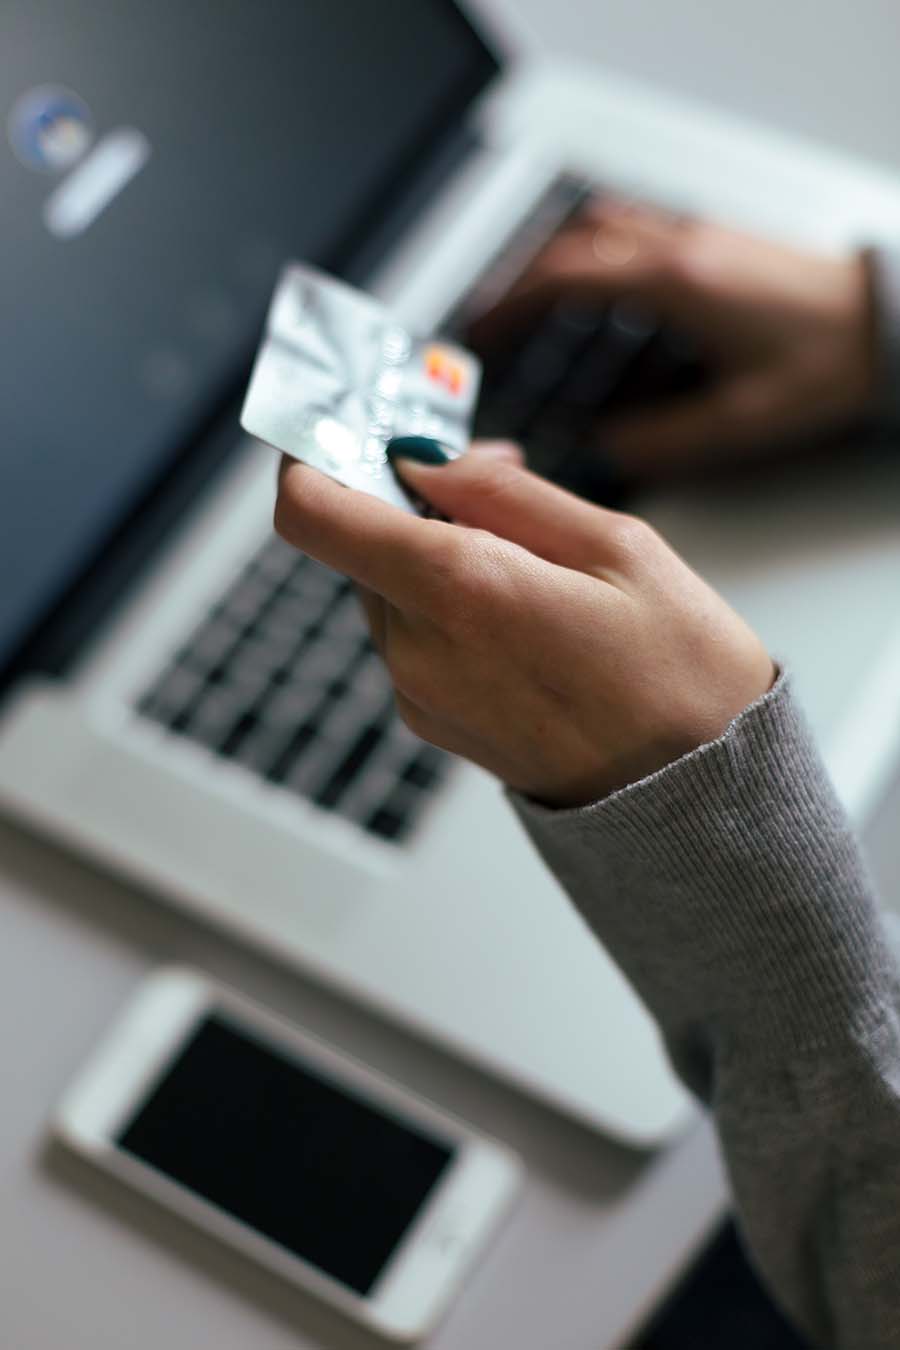 Person entering card info on computure. Freedom CU helps you stay safe while shopping with fraud alerts, transaction verification, and other tools to safeguard your account.